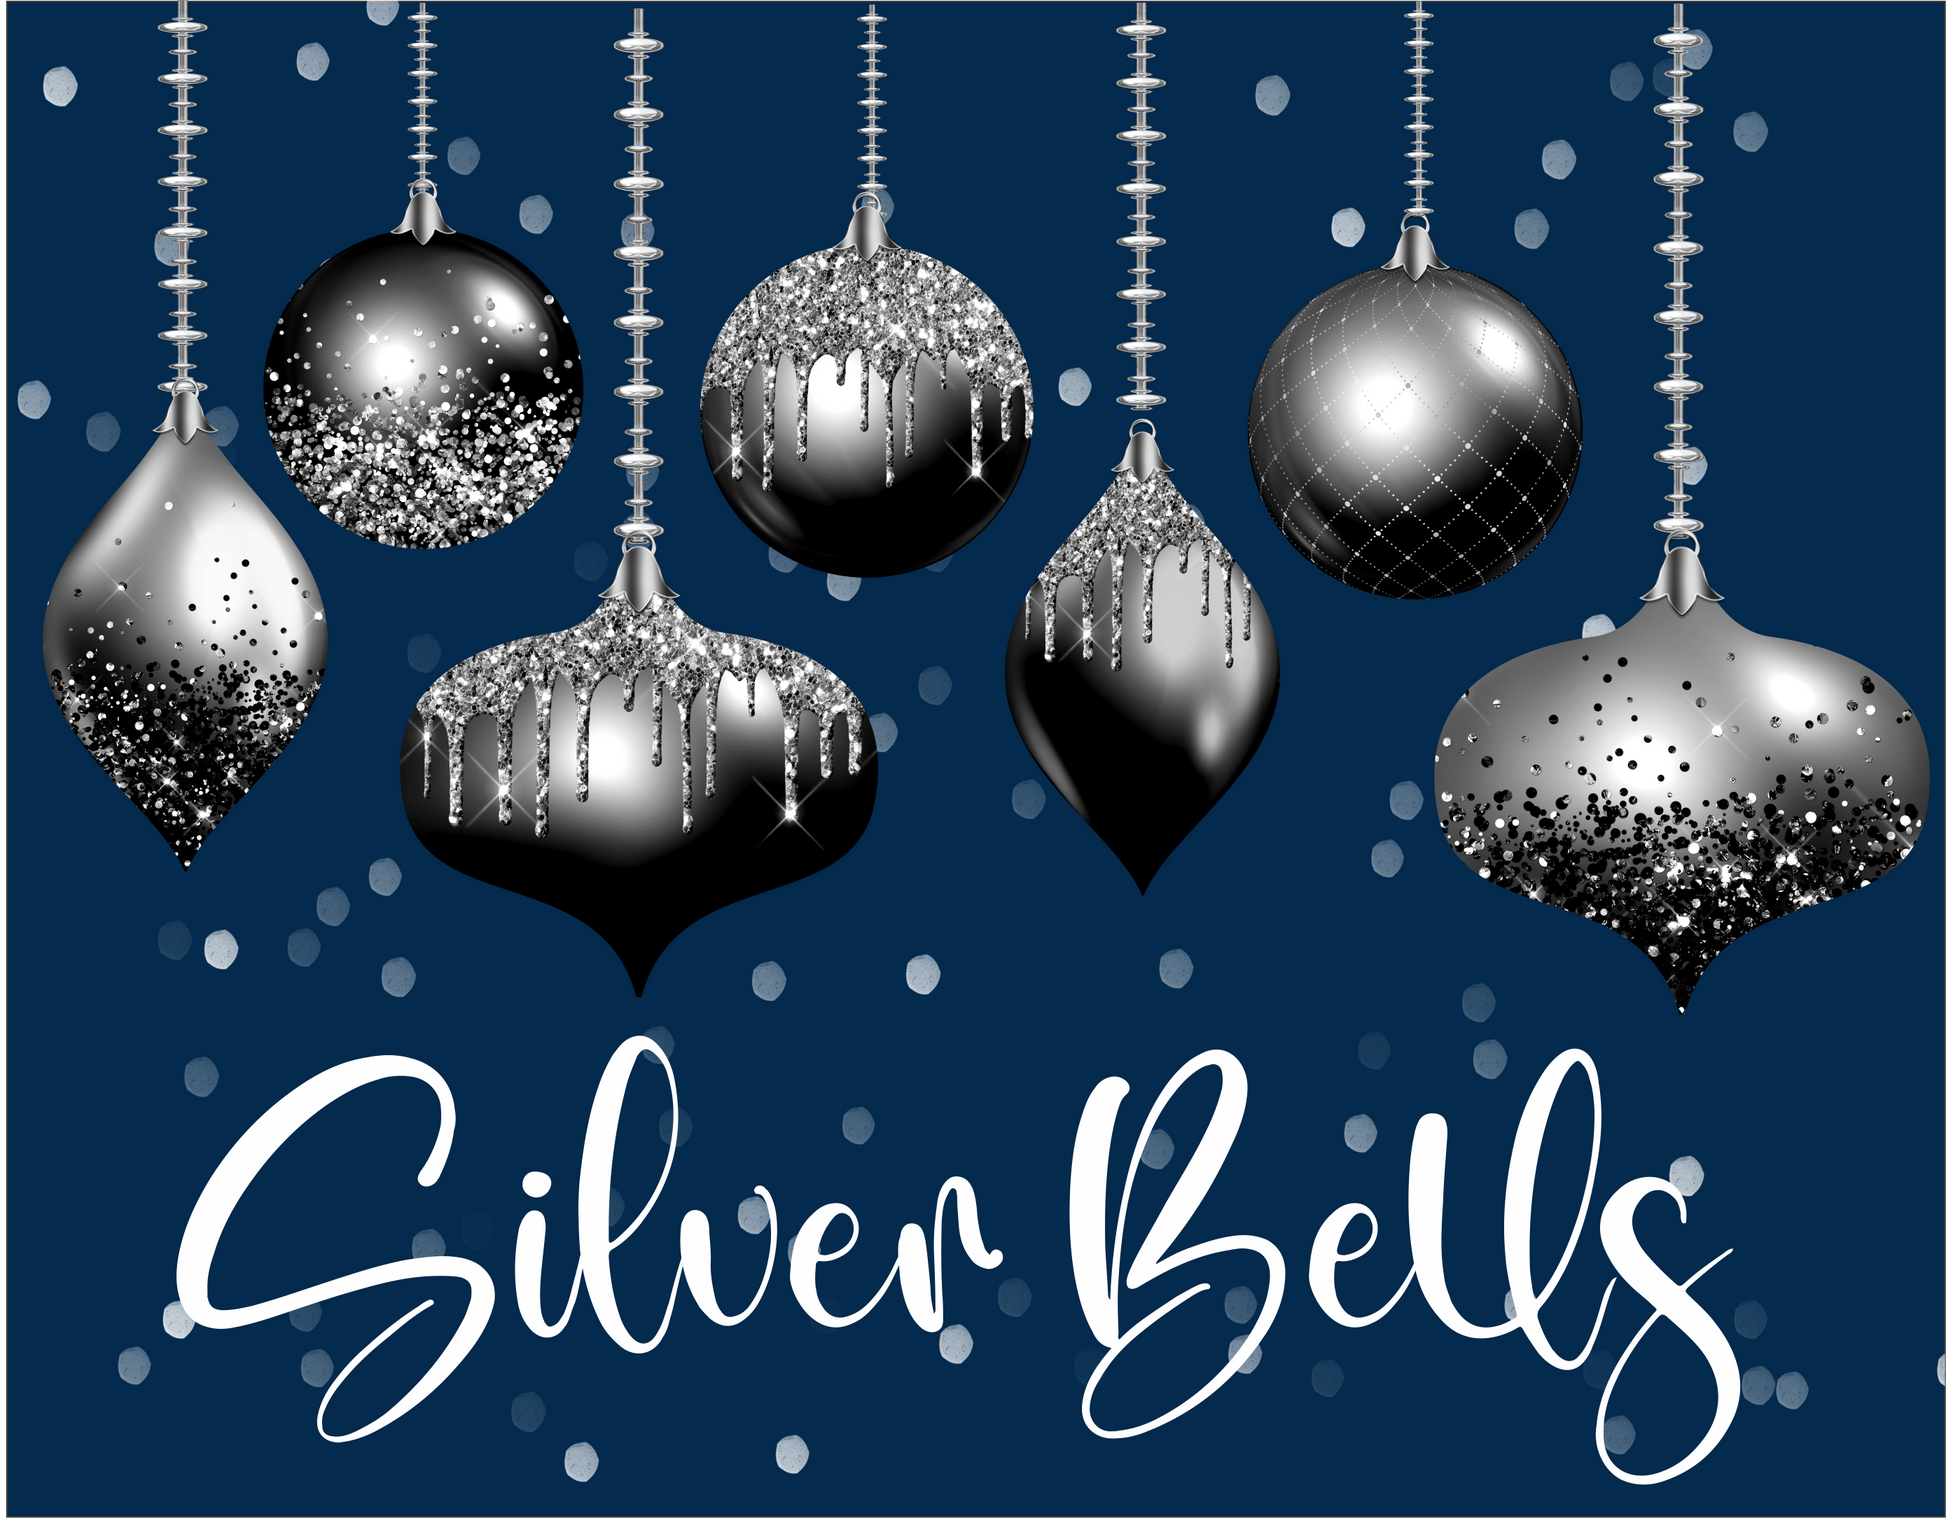 Silver Bells Clip Art, Isolated chrome christmas bell decor and symbols.